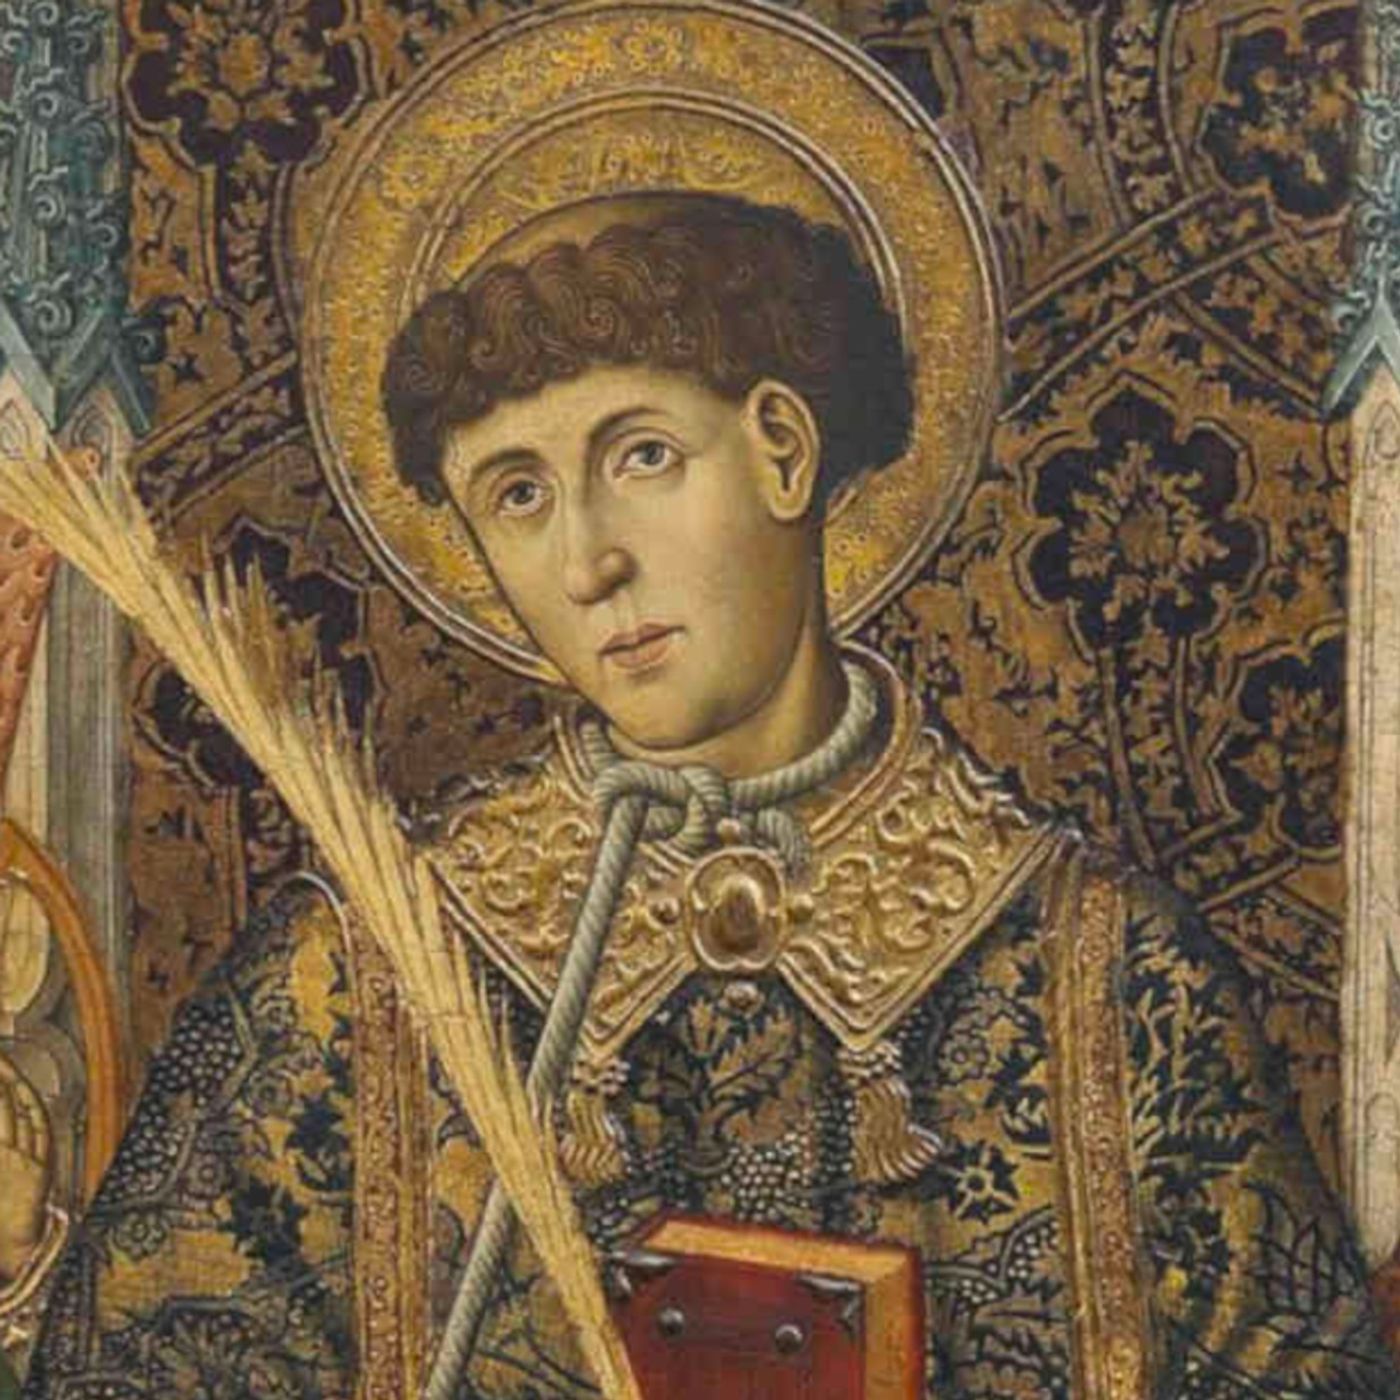 January 22: Saint Vincent, Deacon and Martyr